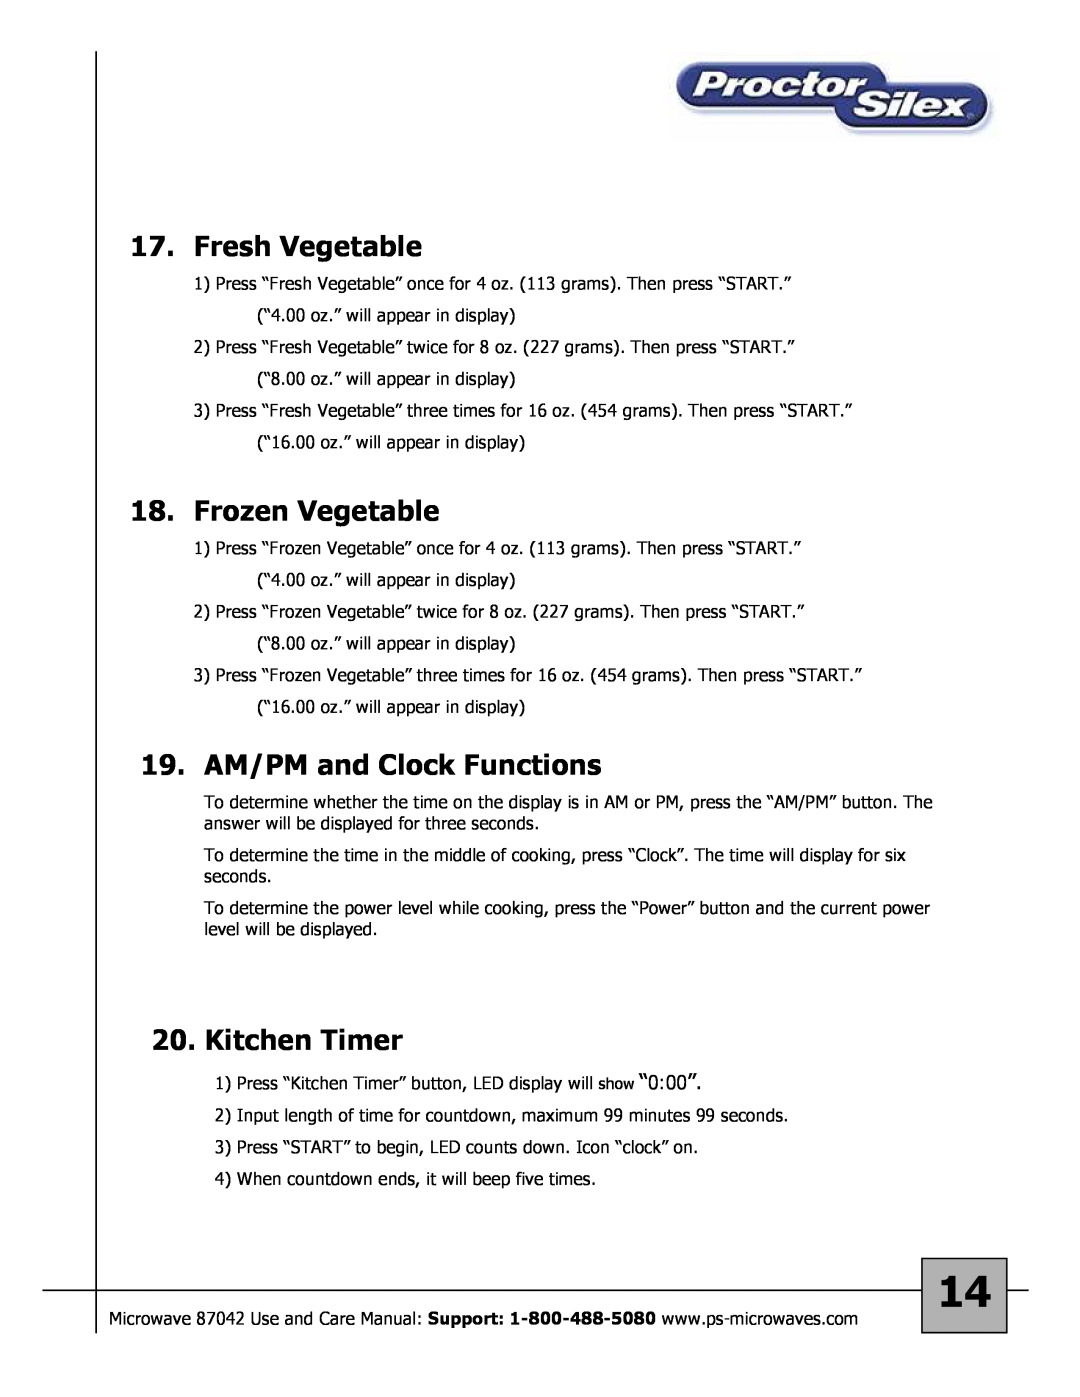 Proctor-Silex 87027 owner manual Fresh Vegetable, Frozen Vegetable, 19.AM/PM and Clock Functions, Kitchen Timer 